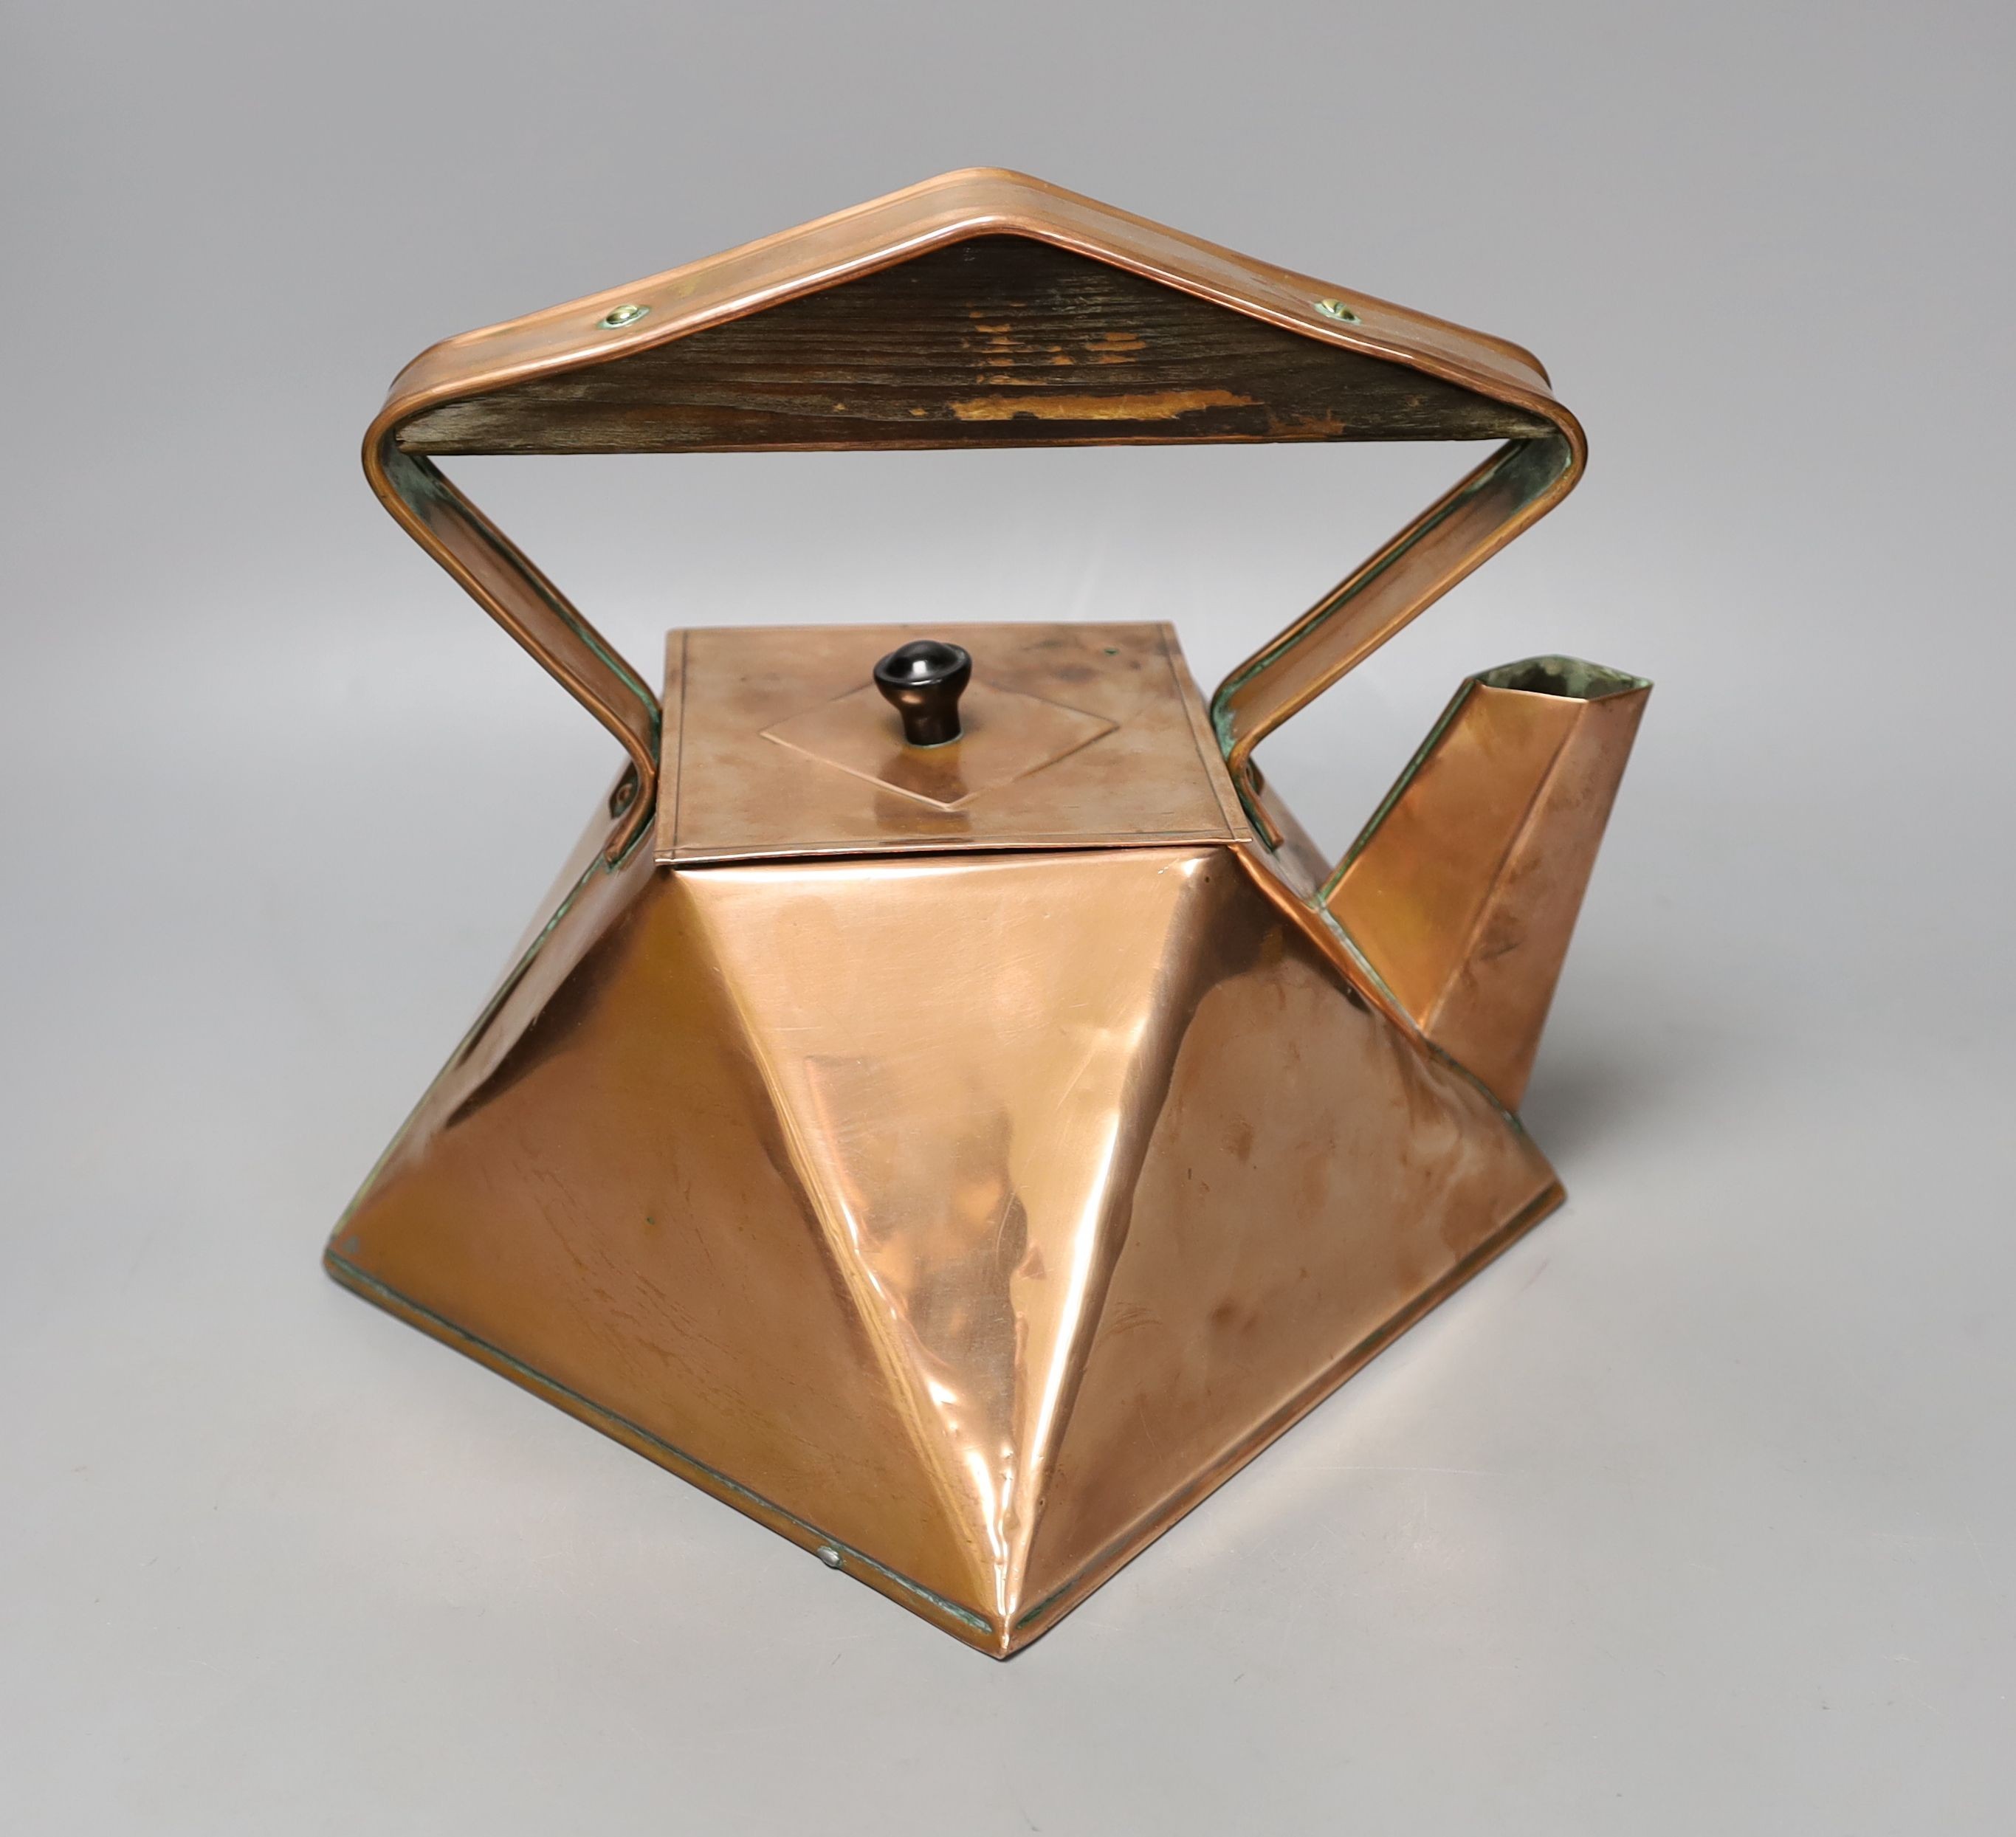 An Arts & Crafts geometric copper kettle, 23cm high, *This lot is being sold in aid of the charity Dogs Trust UK with 100% of the hammer price going to the charity